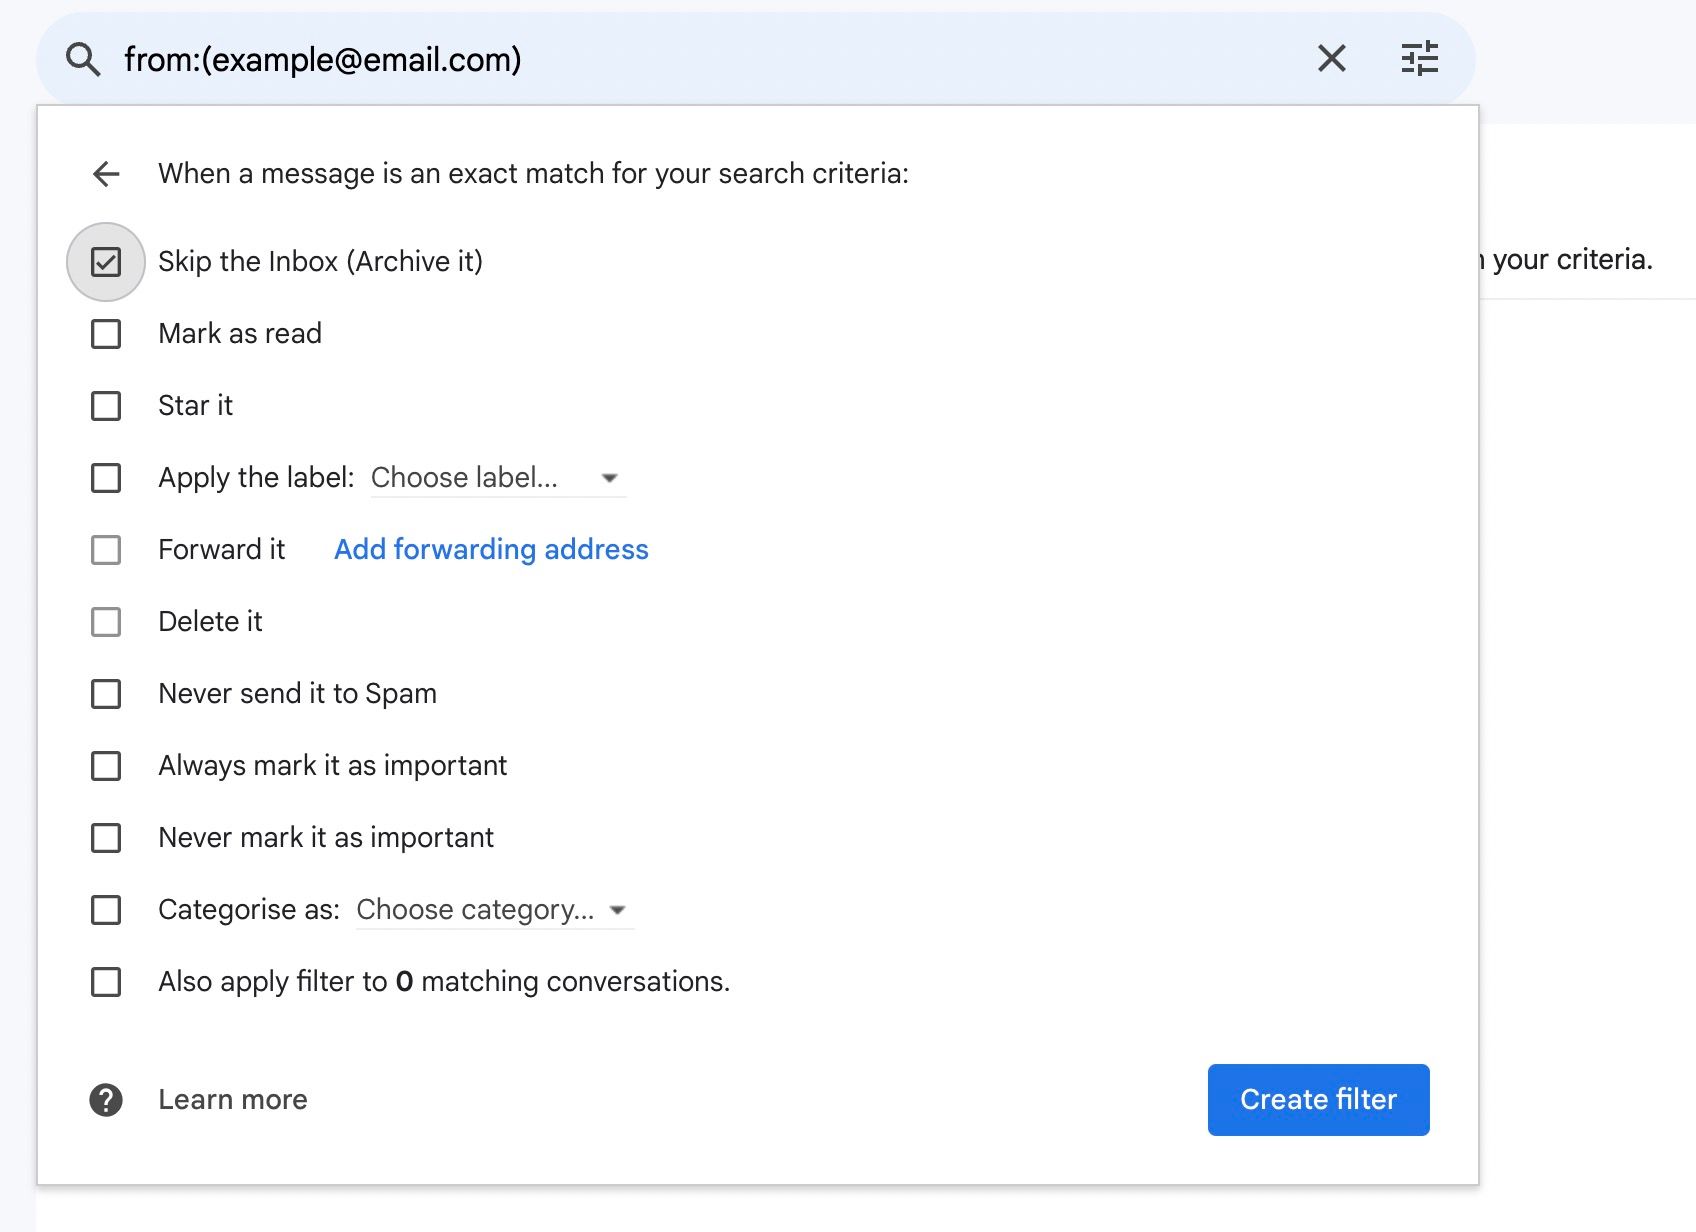 A screenshot showing the list of action options for spam filters in Gmail